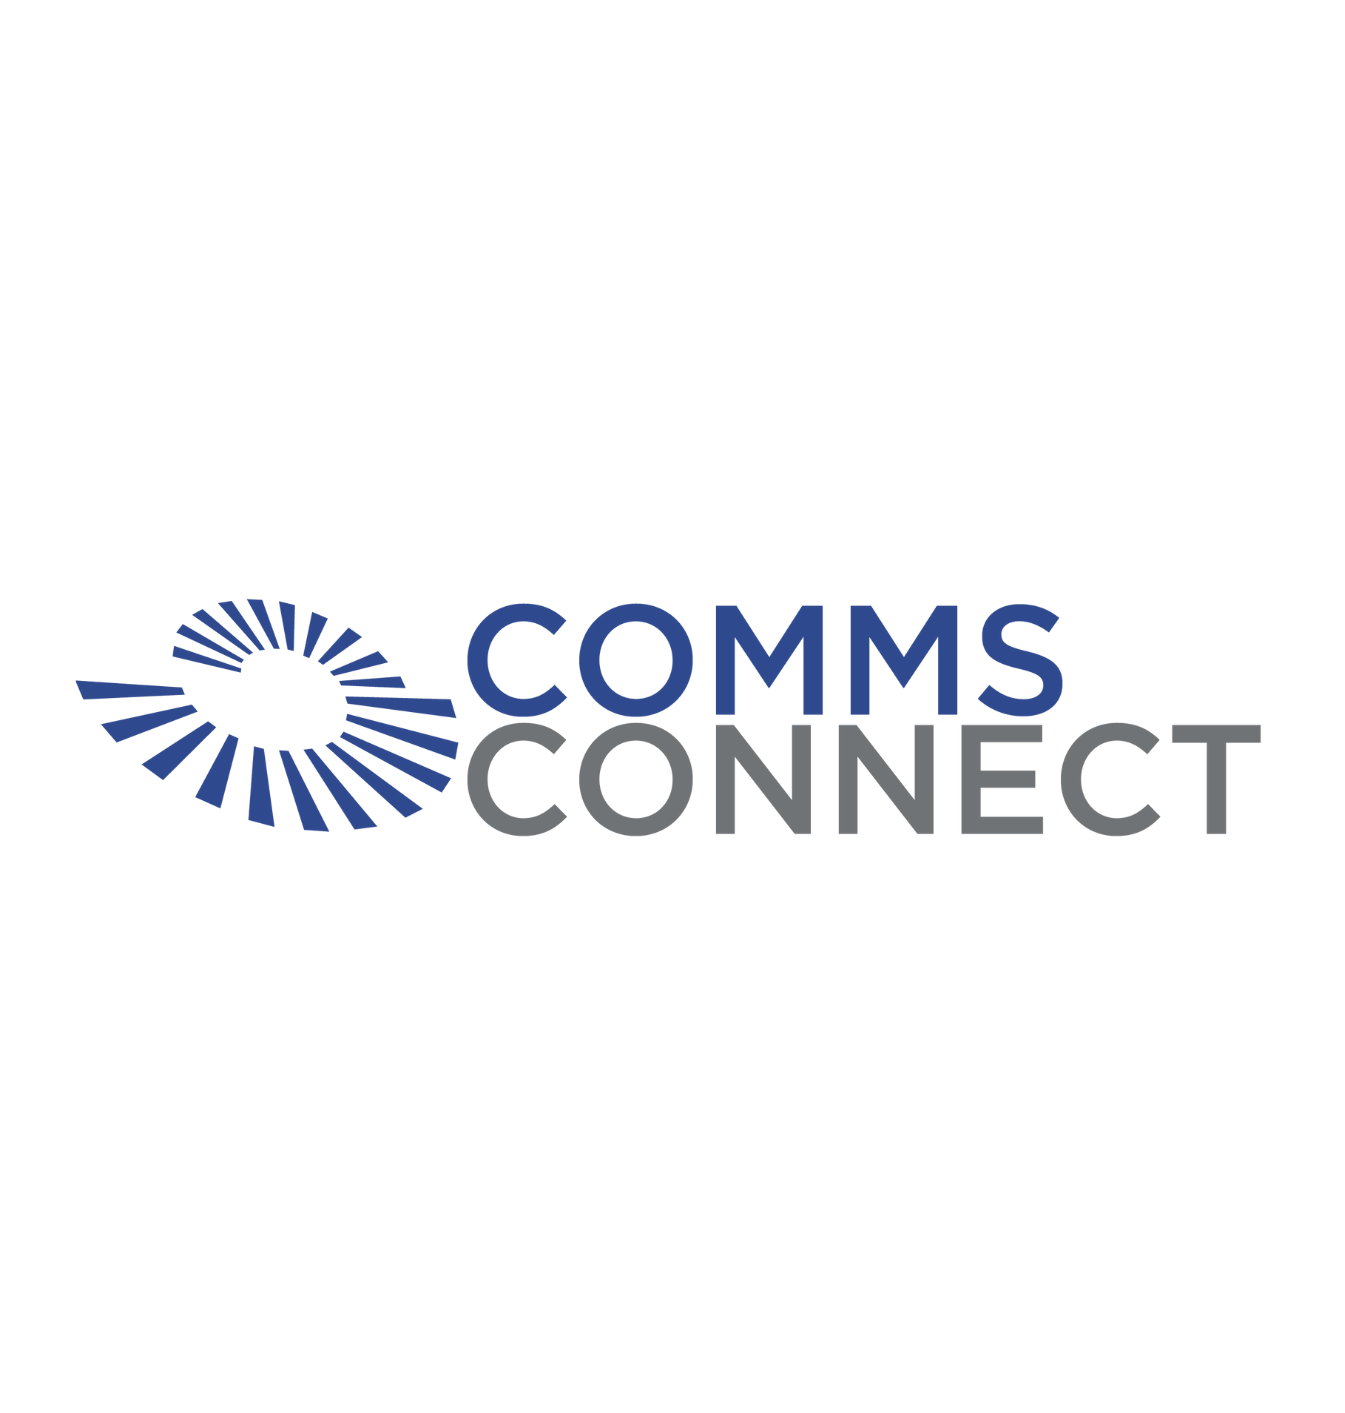 comms connect logo